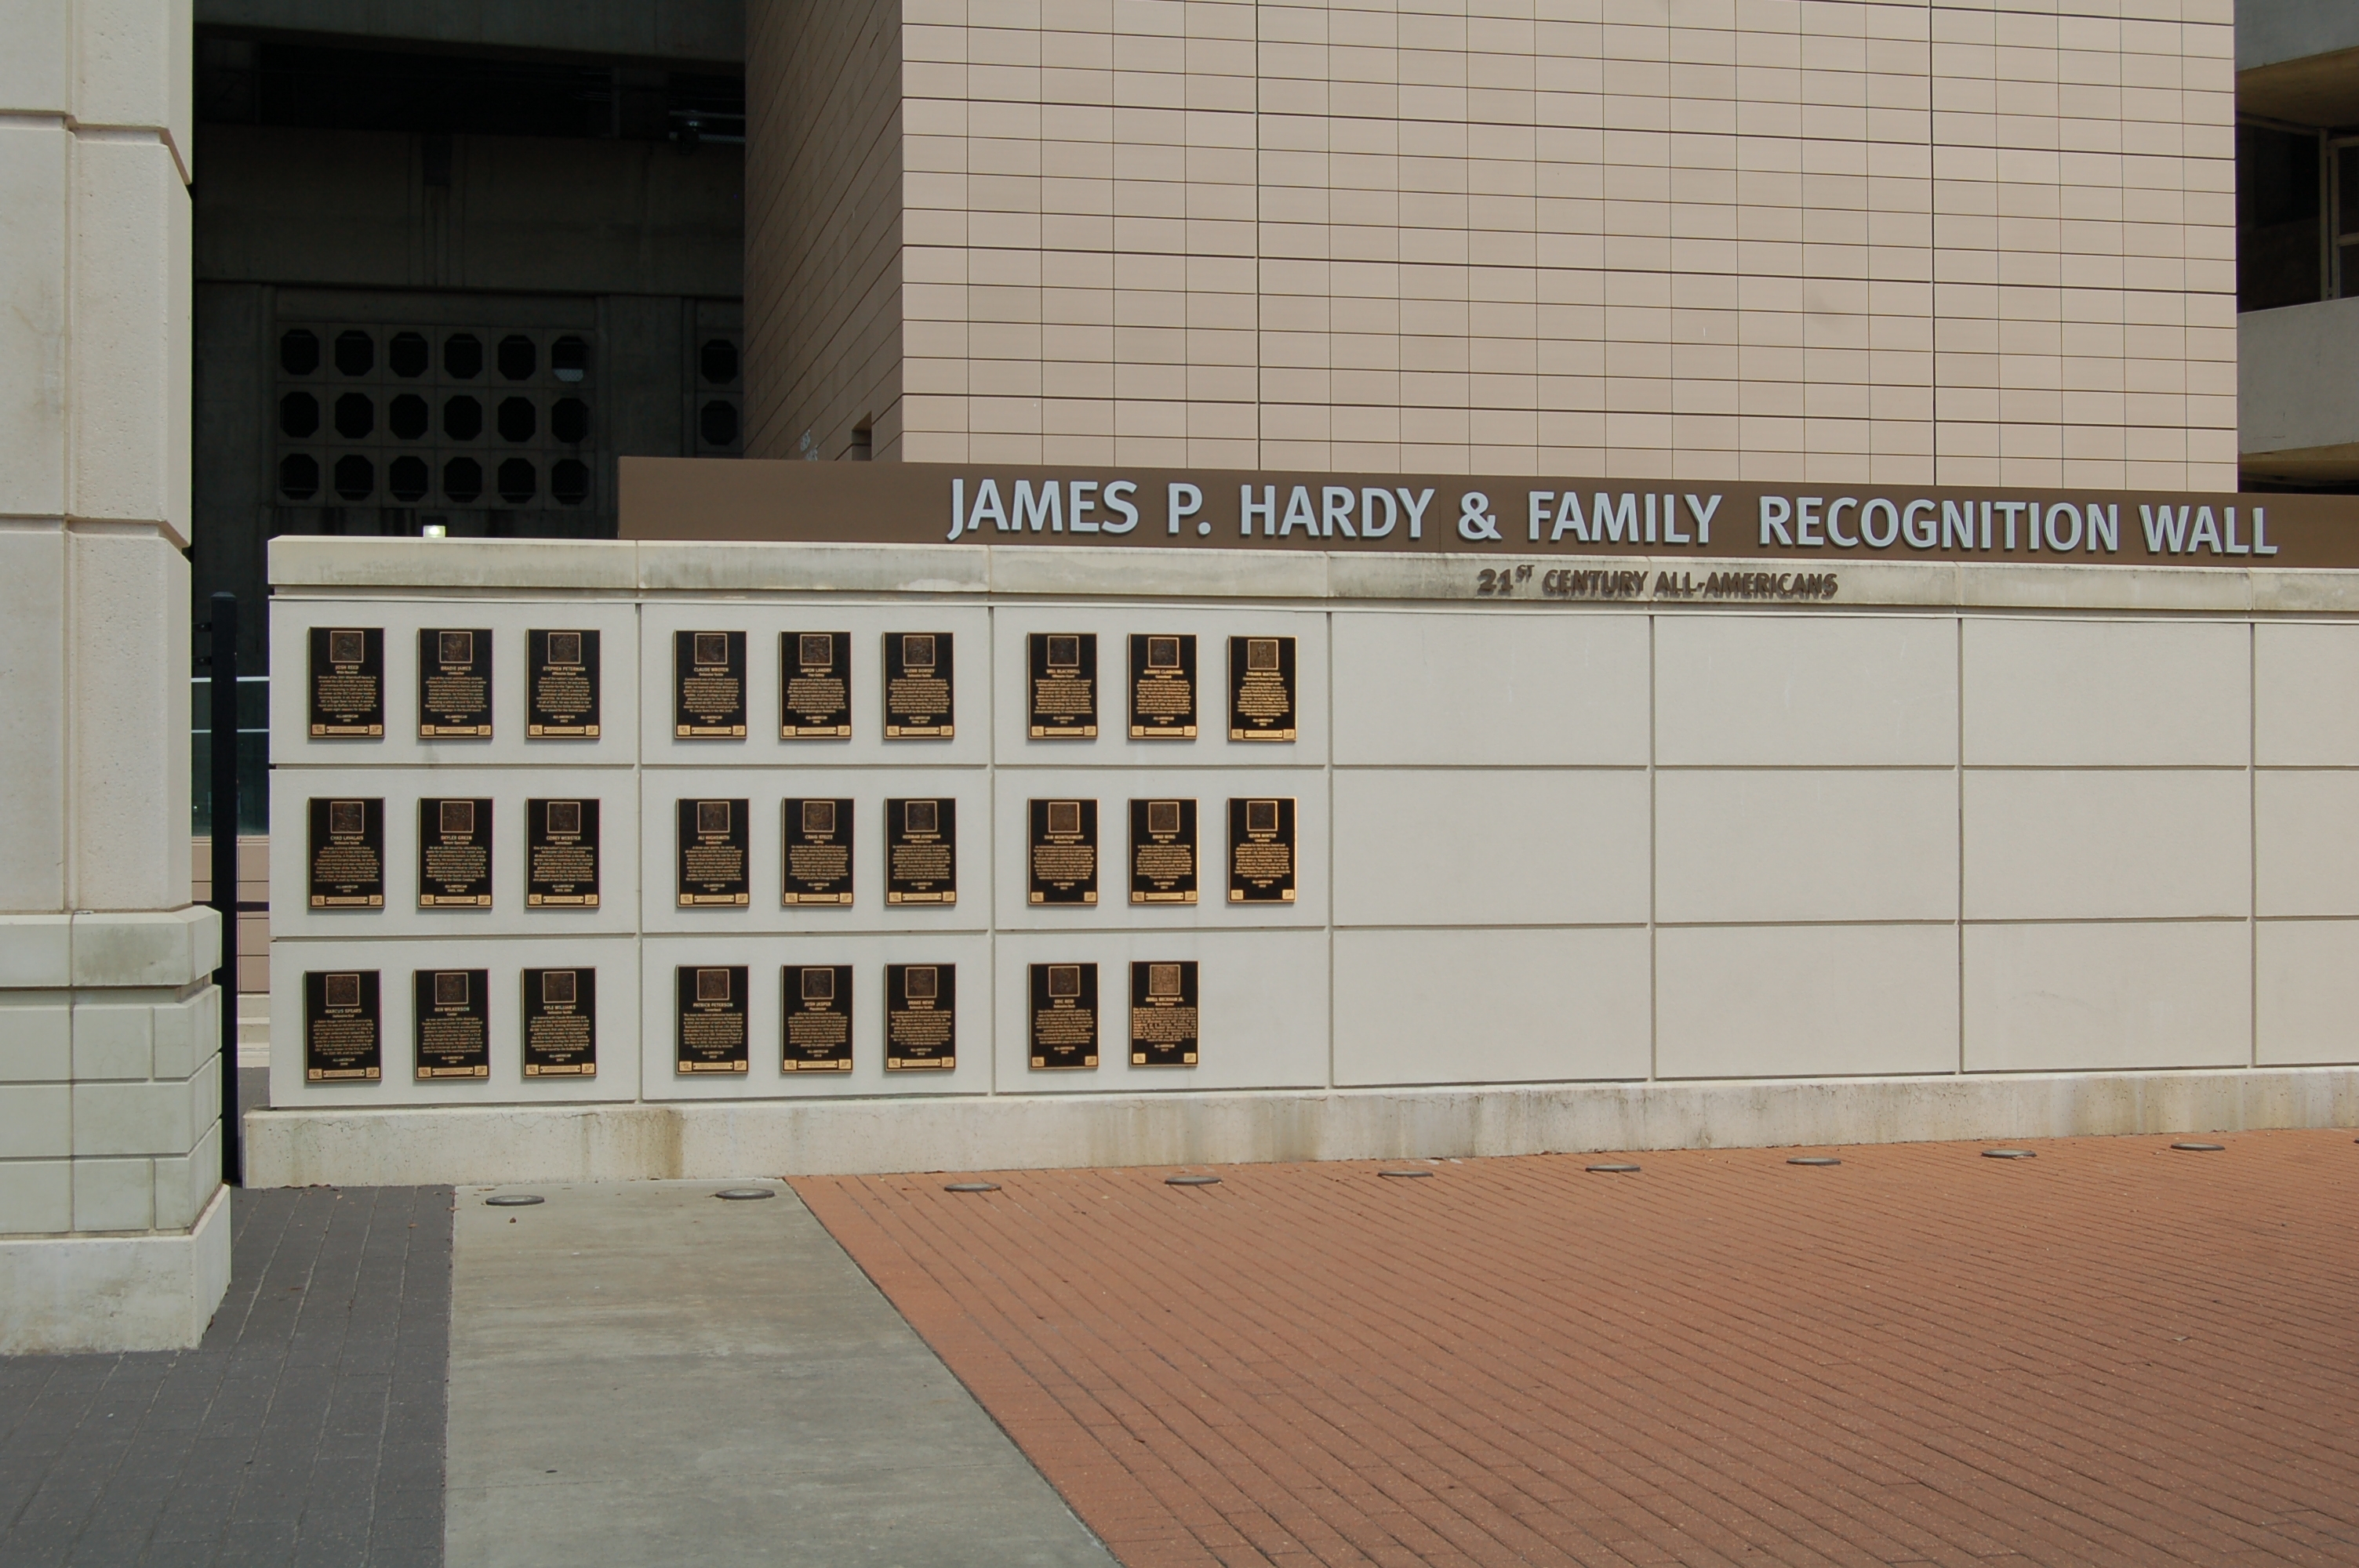 The James P. Hardy & Family Recognition Wall